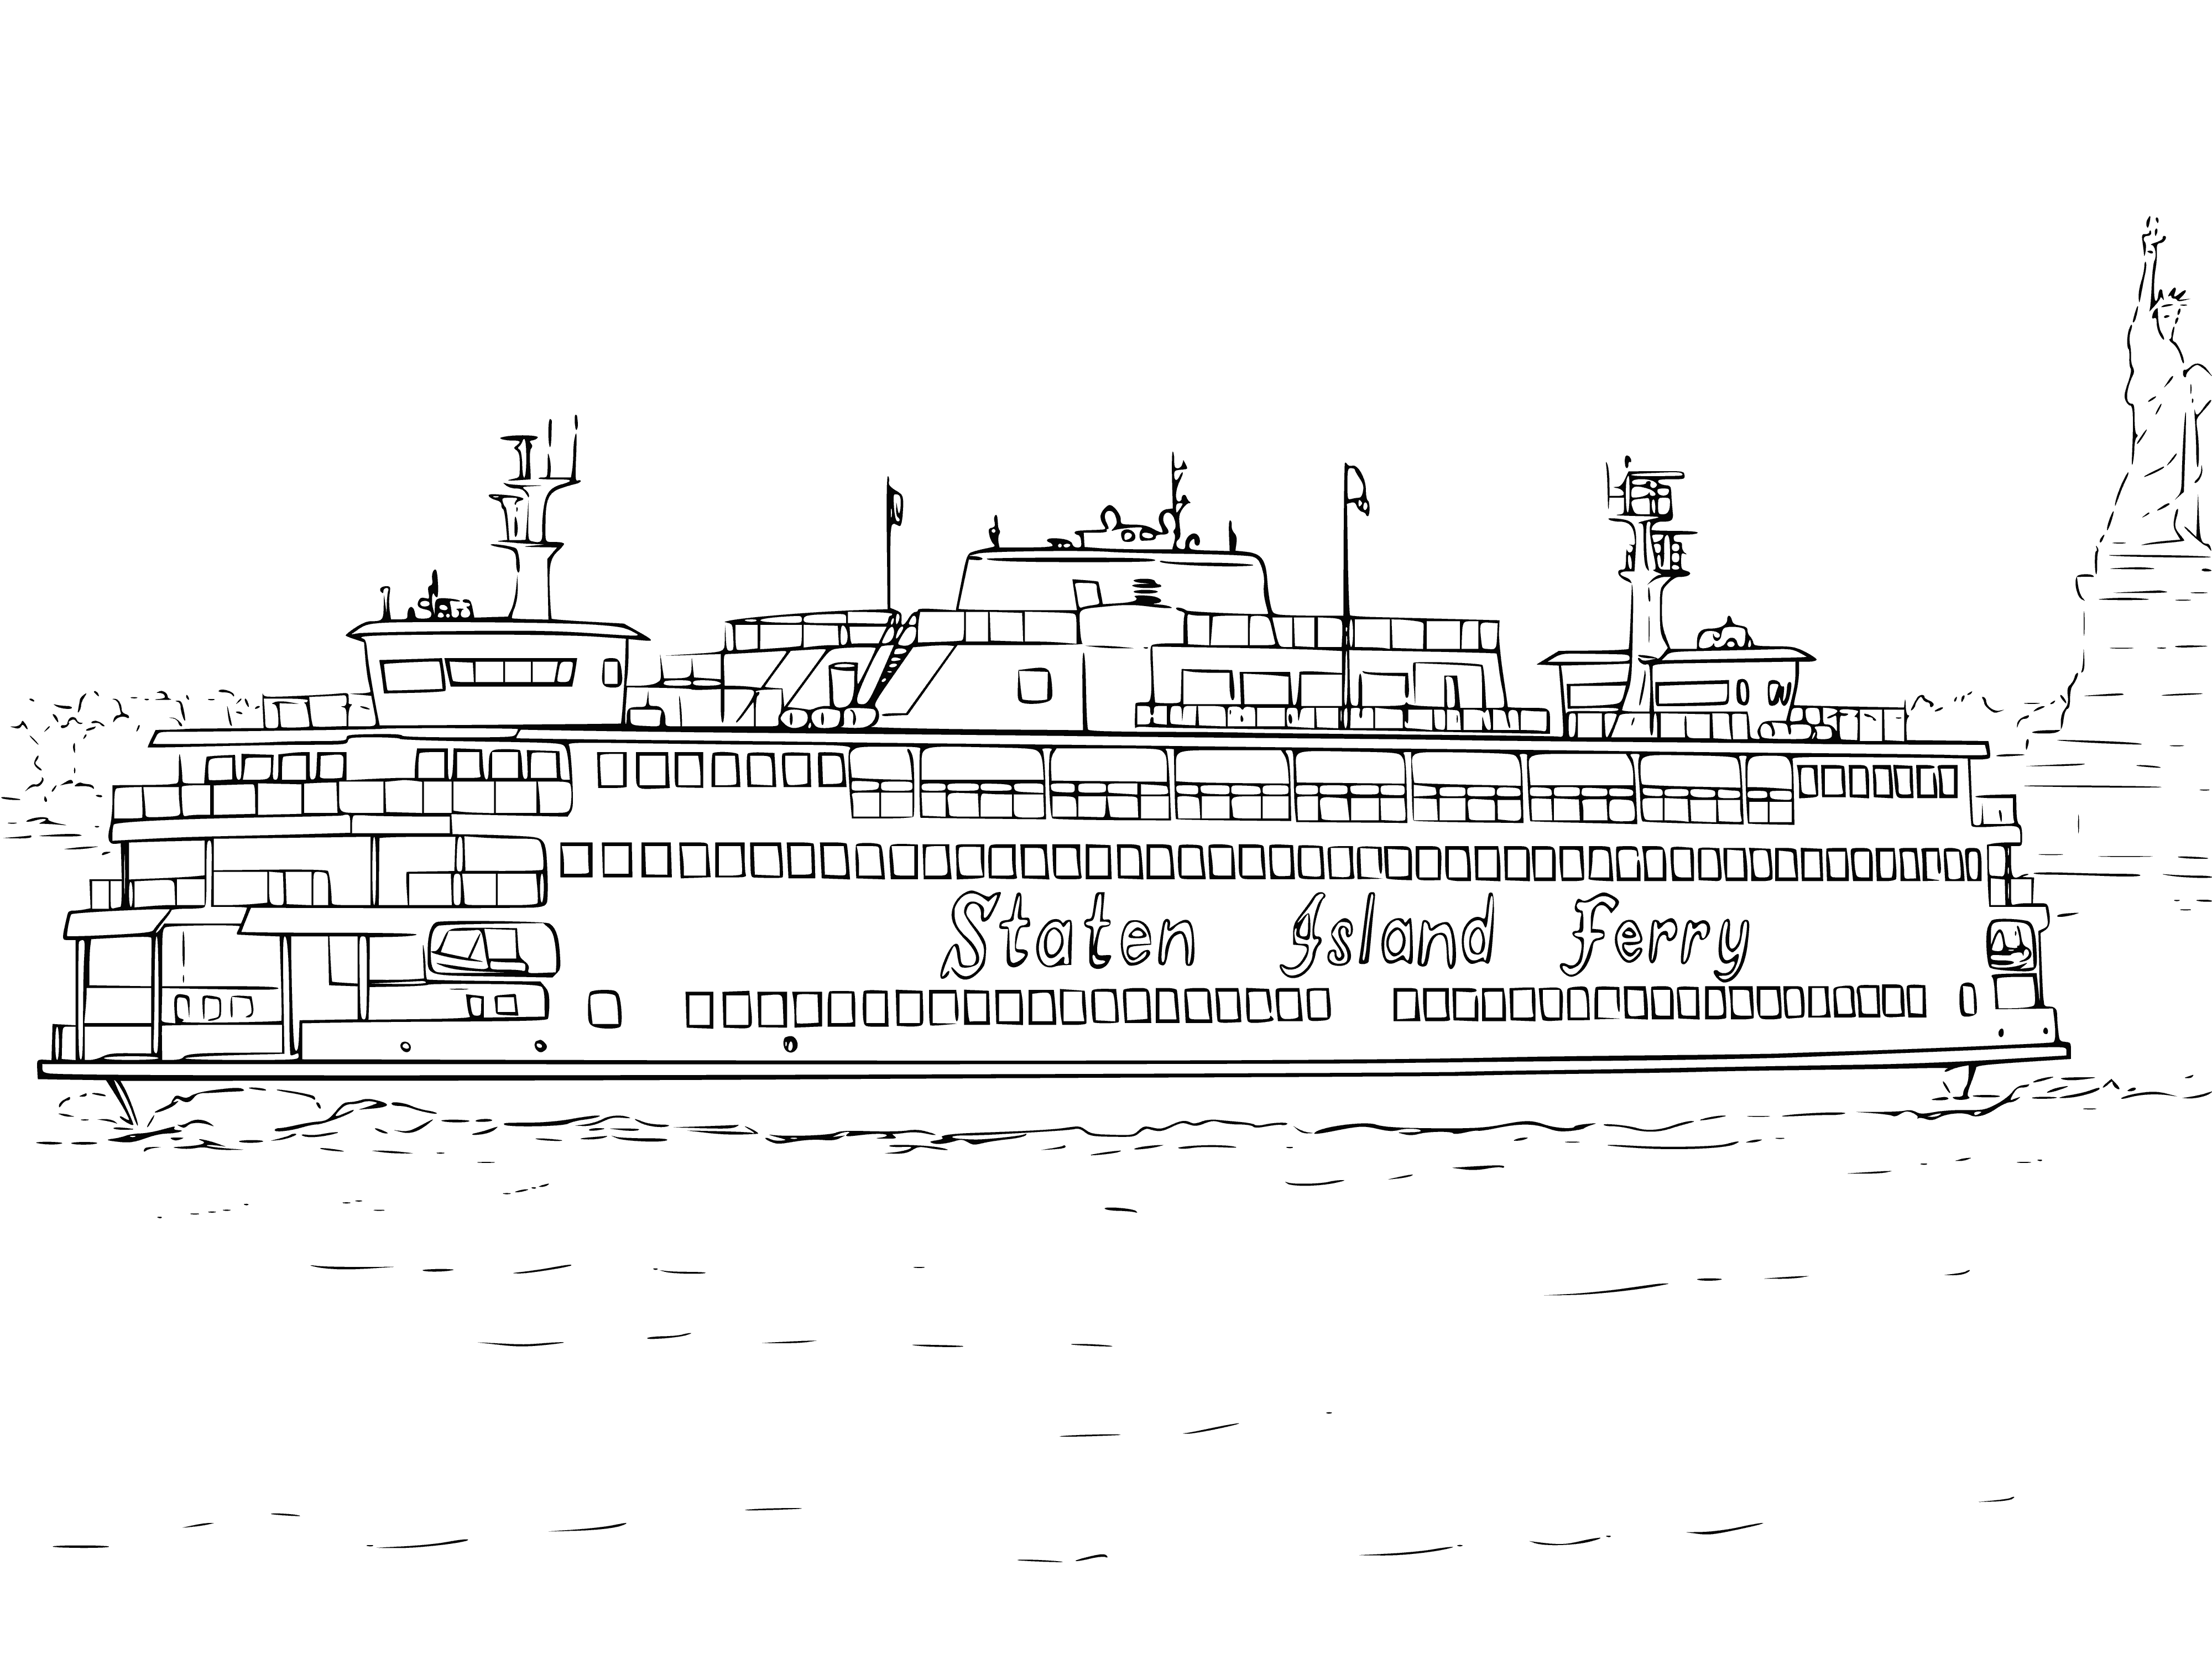 coloring page: People on Ferry enjoying views in many ways: walking, sitting, standing. Big, white Ferry with blue stripes and many levels, windows. #Ferrylife